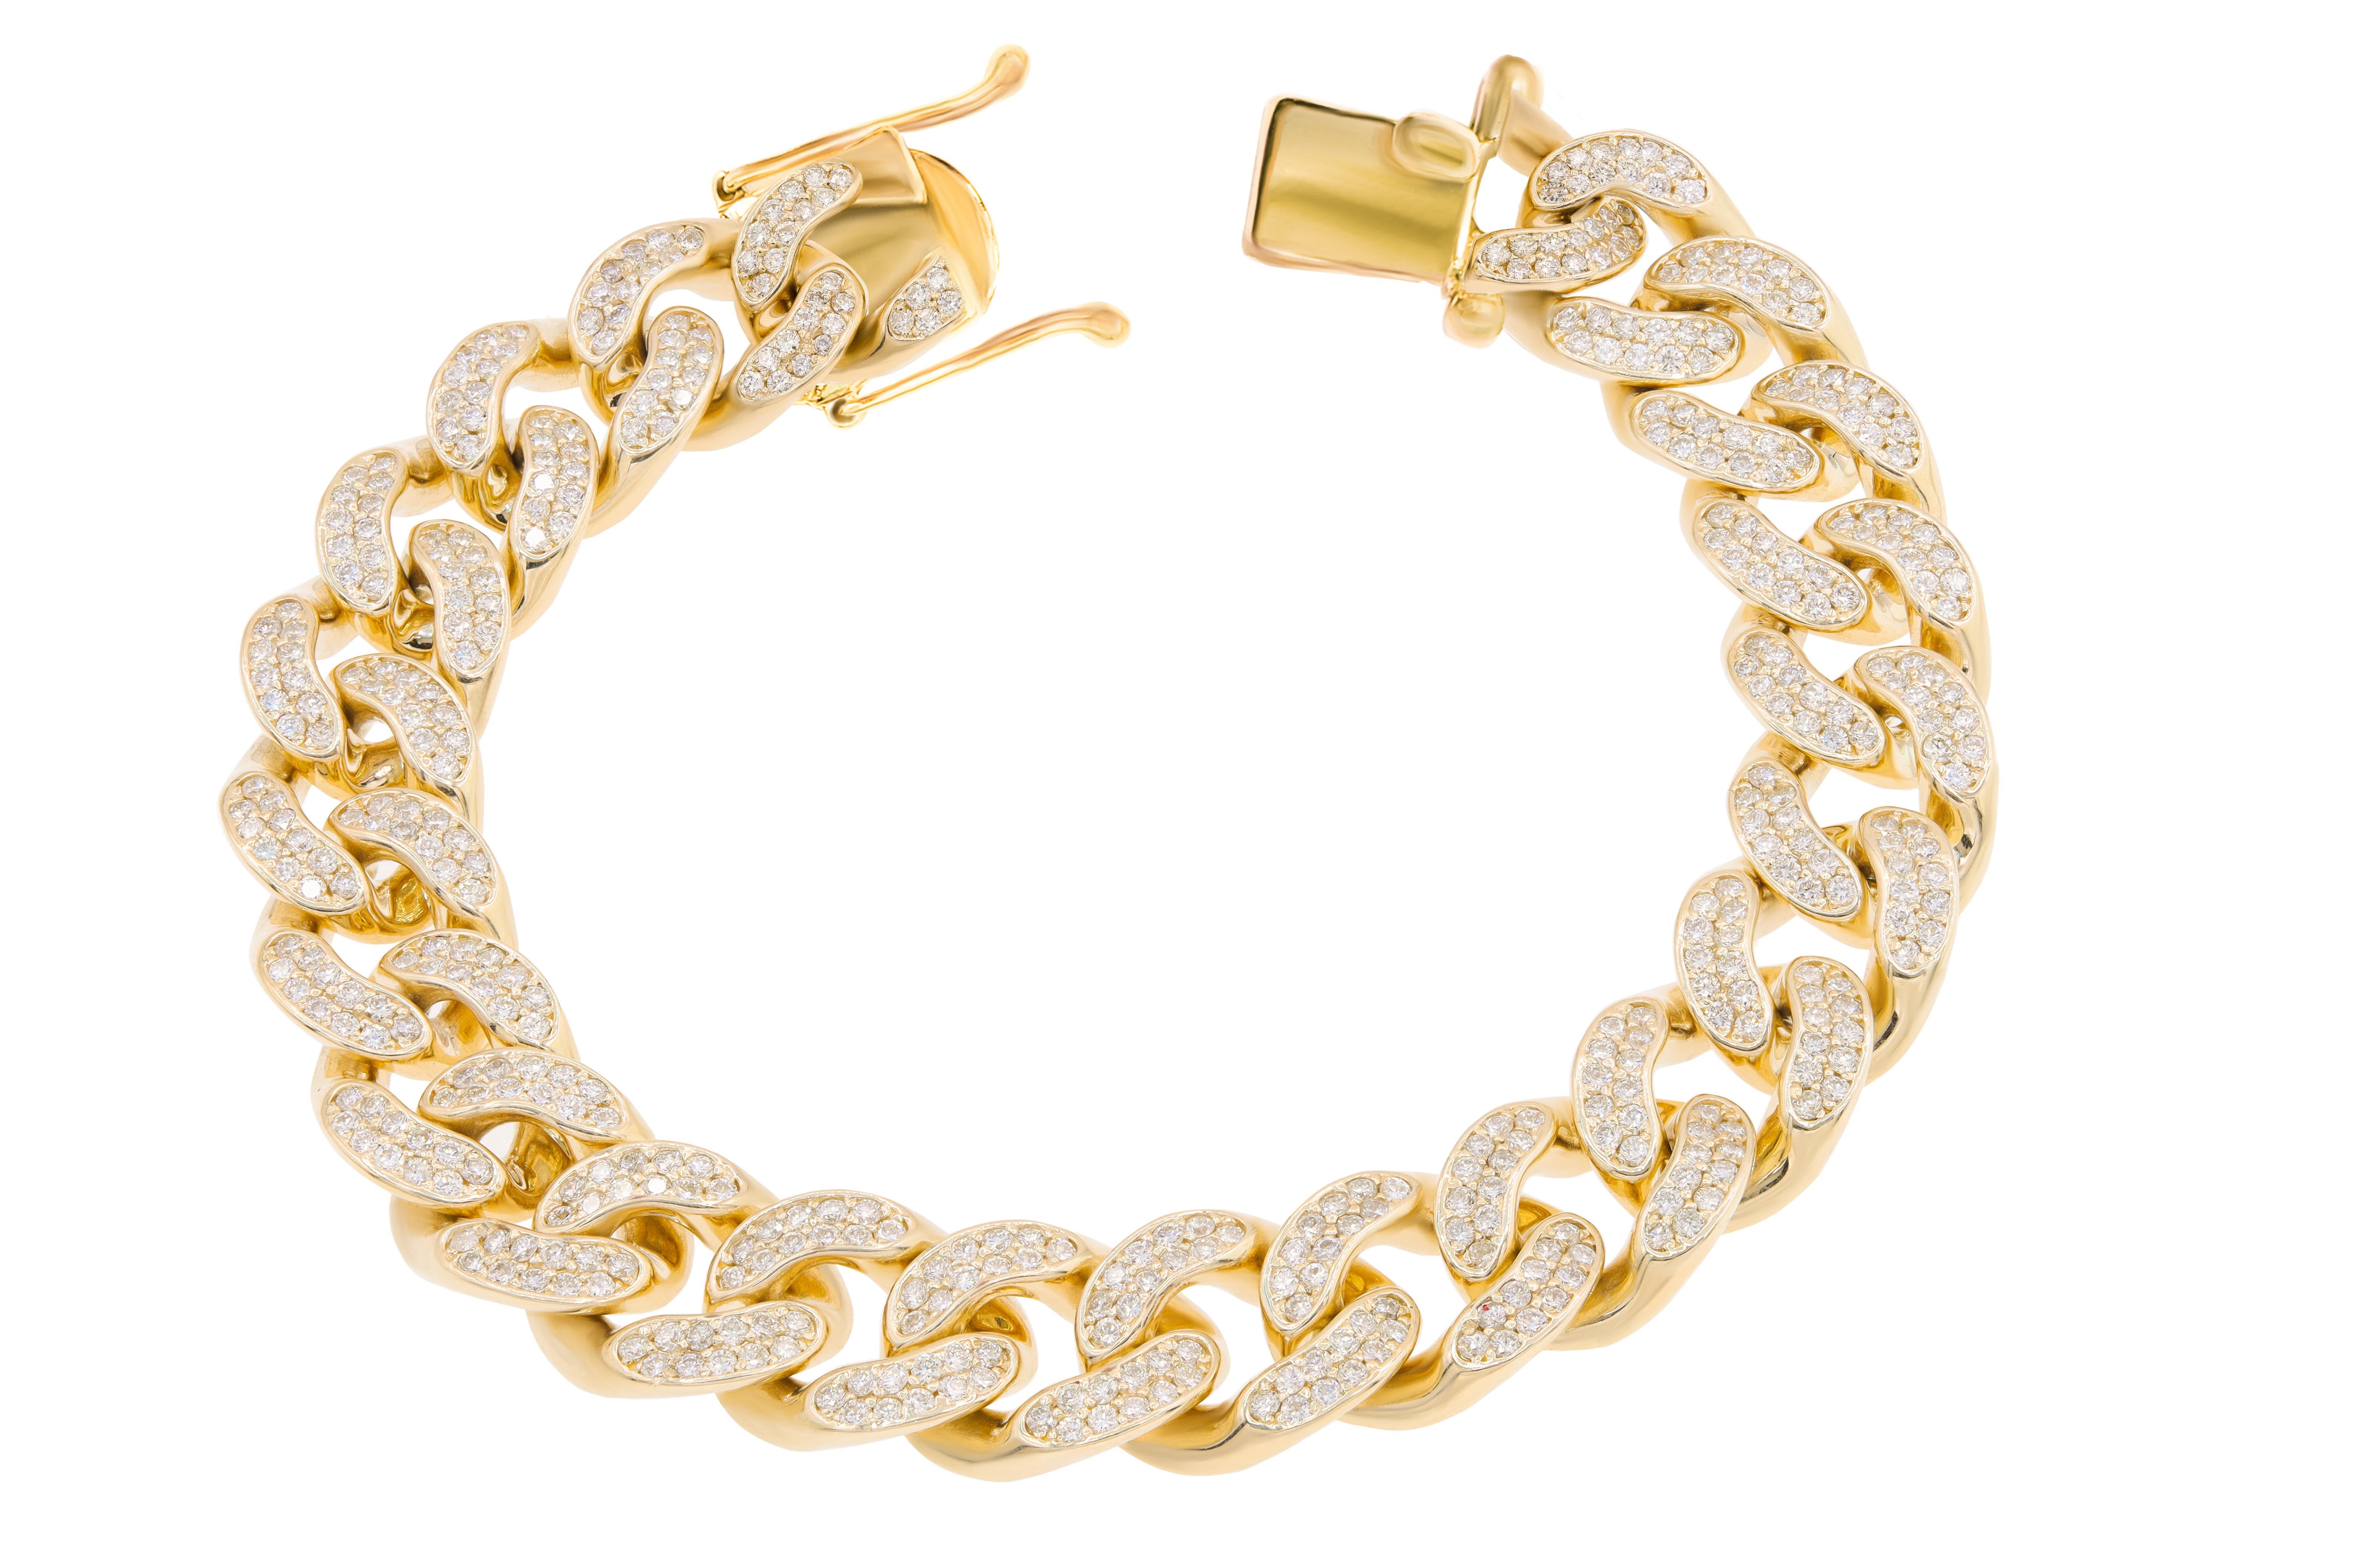 14kt yellow gold pave linked bracelet featuring 6.00 cts of round diamonds
Diana M is one-stop shop for all your jewelry shopping, carrying line of diamond rings, earrings, bracelets, necklaces, and other fine jewelry.
We create our jewelry from